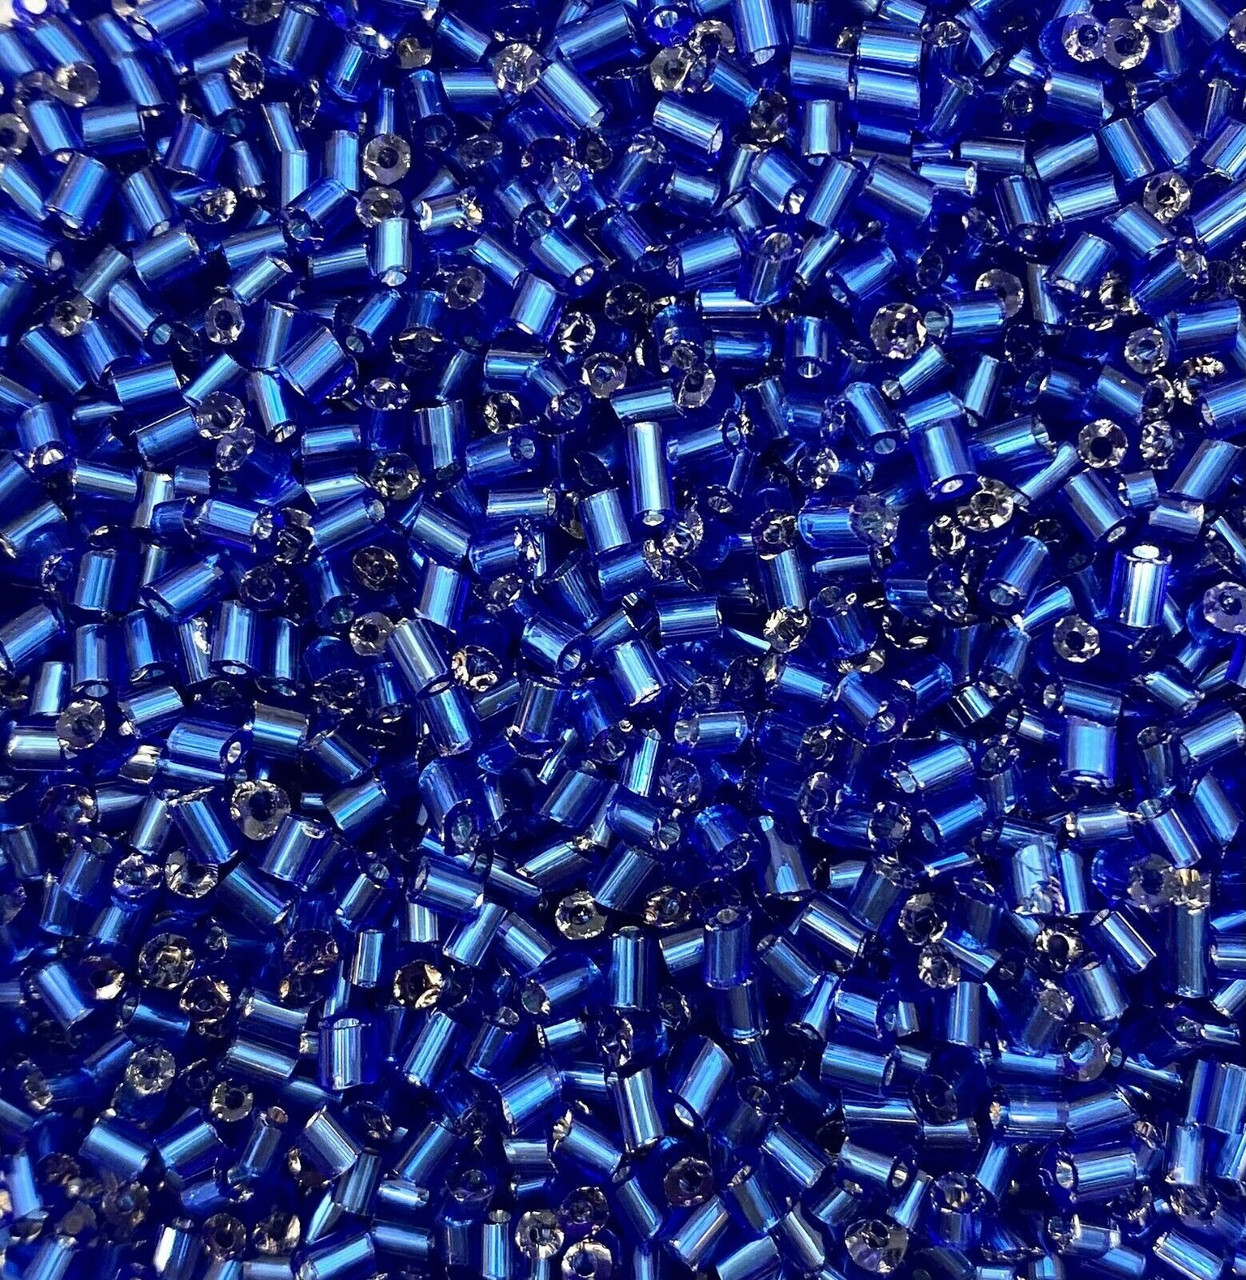 50g glass HEX seed beads - Deep Blue Silver-Lined, size 11/0 (approx 2mm)